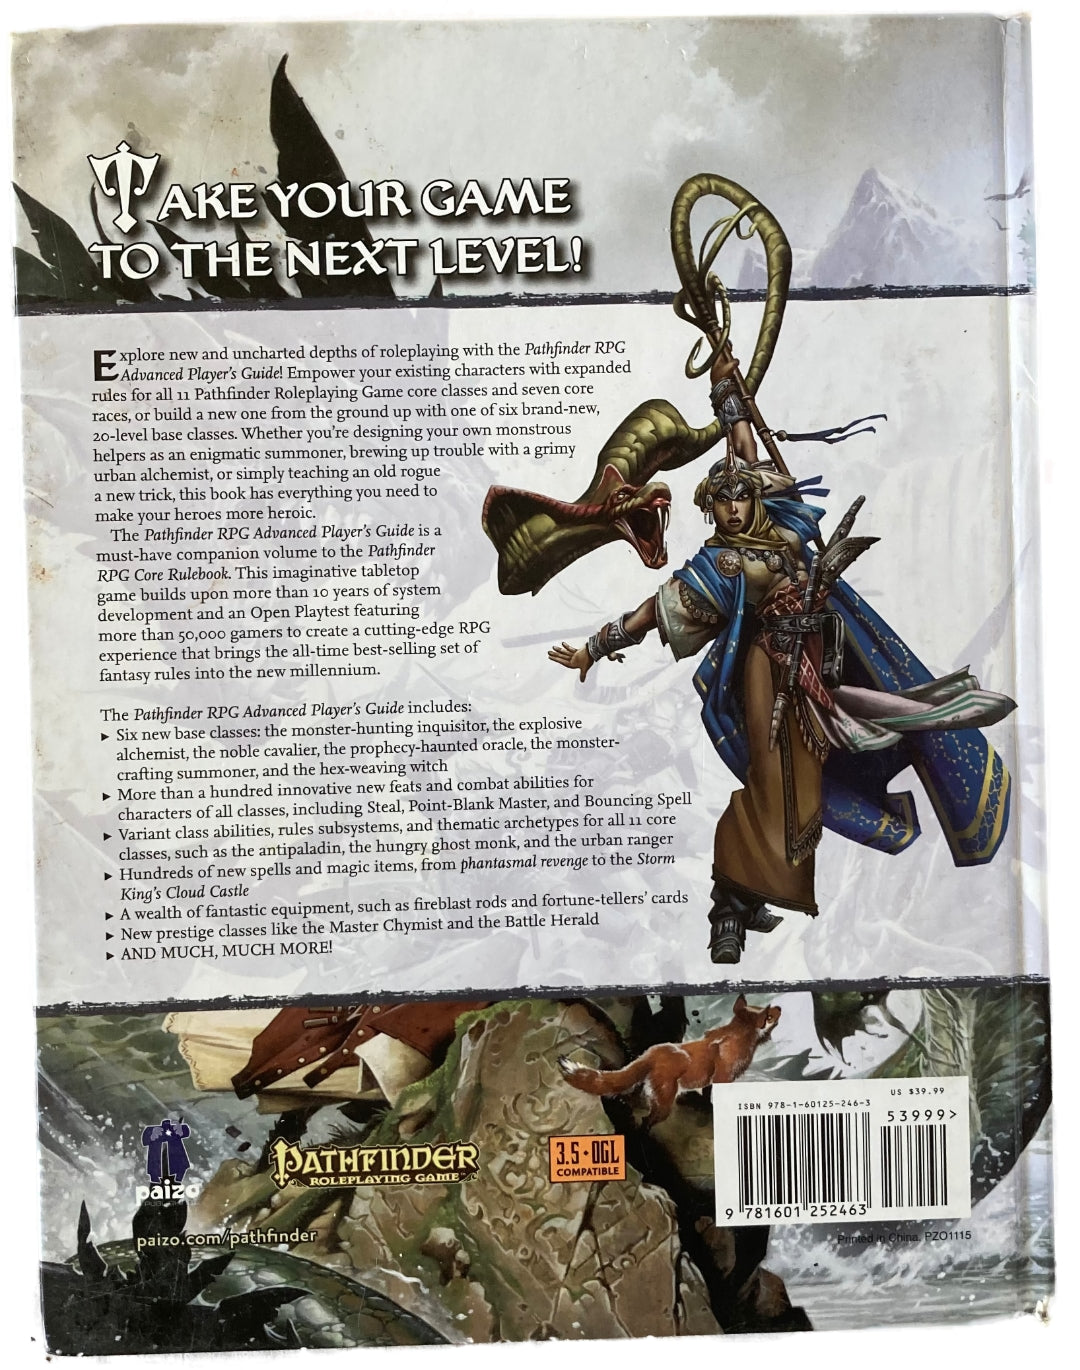 Paizo - Pathfinder RPG - Advanced Players Guide (Second Printing 2010)